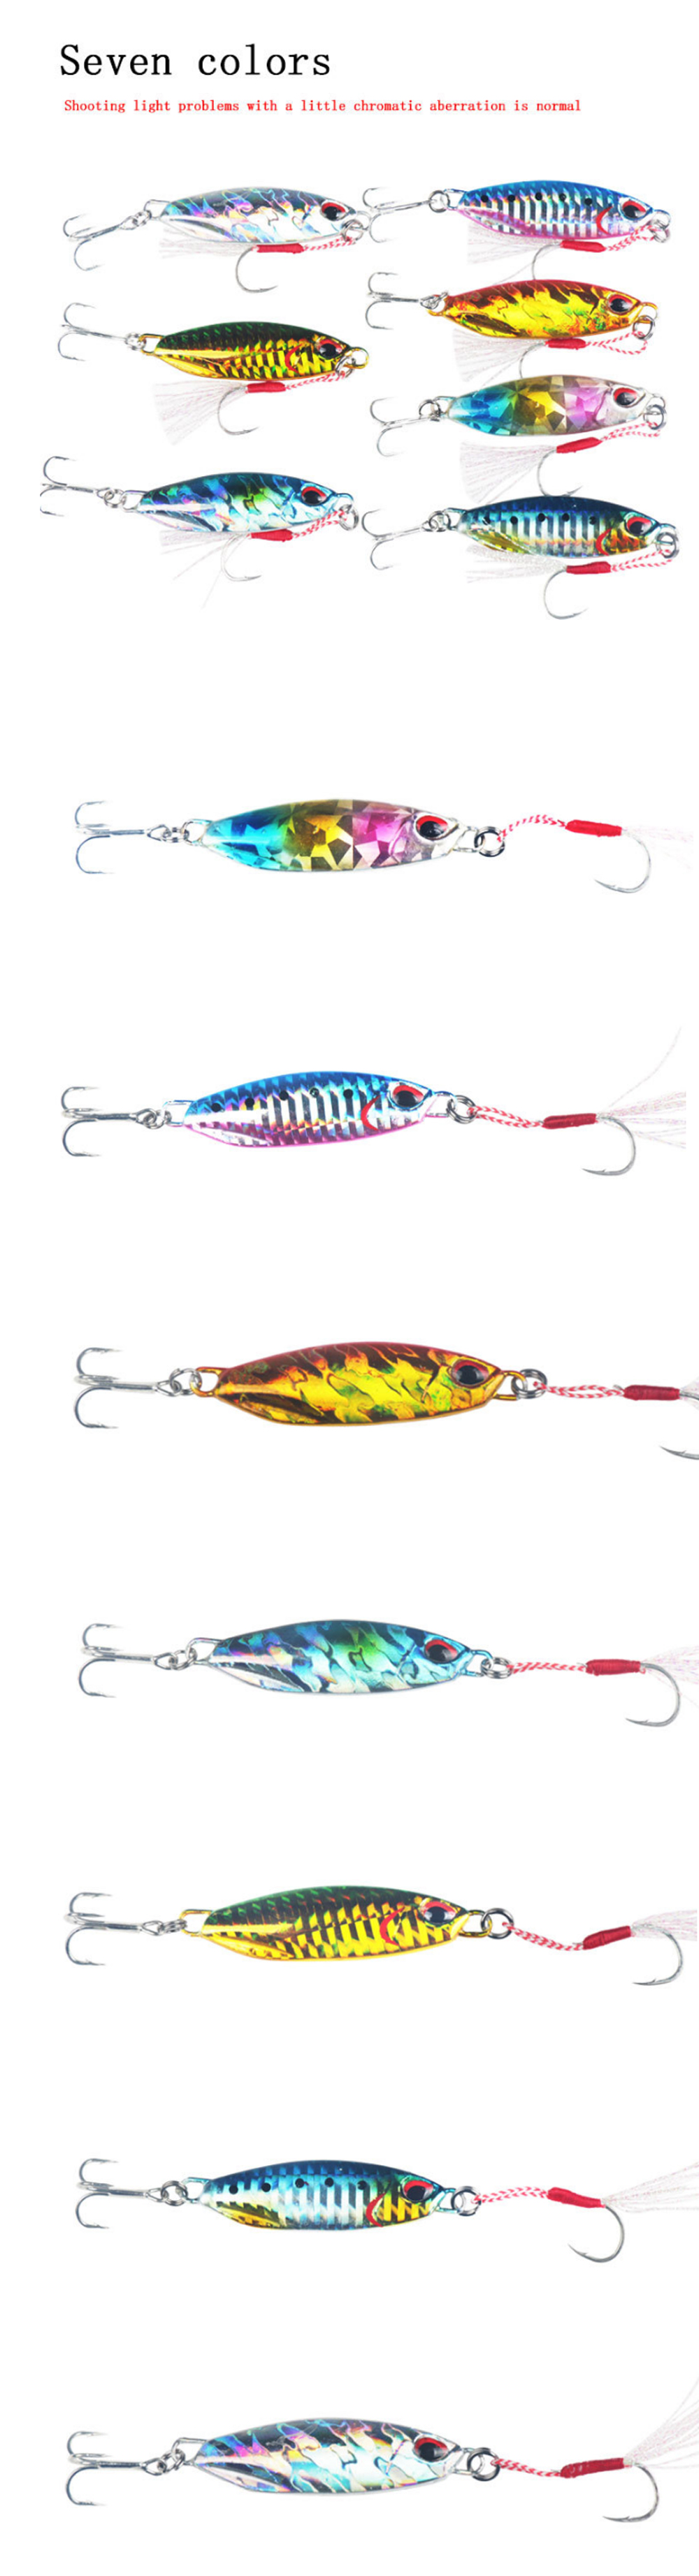 1-Pcs-5cm-30g-Fishing-Lures-Spinners-River-Sea-Lakes-Hard-Baits-Artificial-Fishing-Tackle-1743937-2